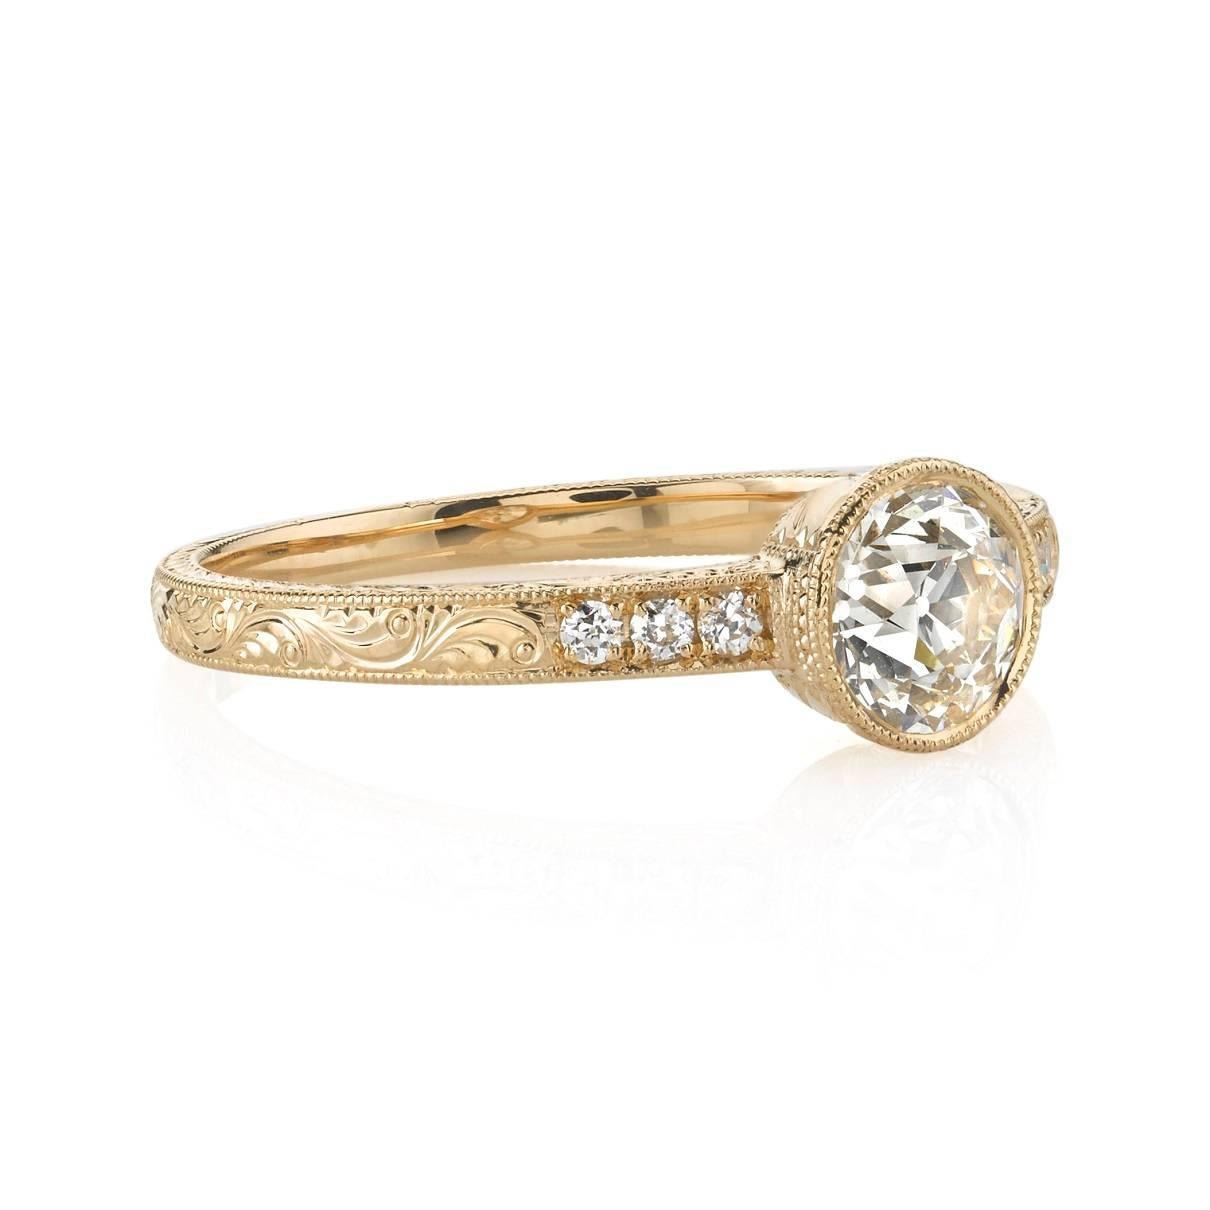 0.63ct H/SI1 old European cut diamond EGL certified and set in a handcrafted 18k rose gold mounting.  A sweet bezel set engagement ring featuring an engraved band with diamond accents.